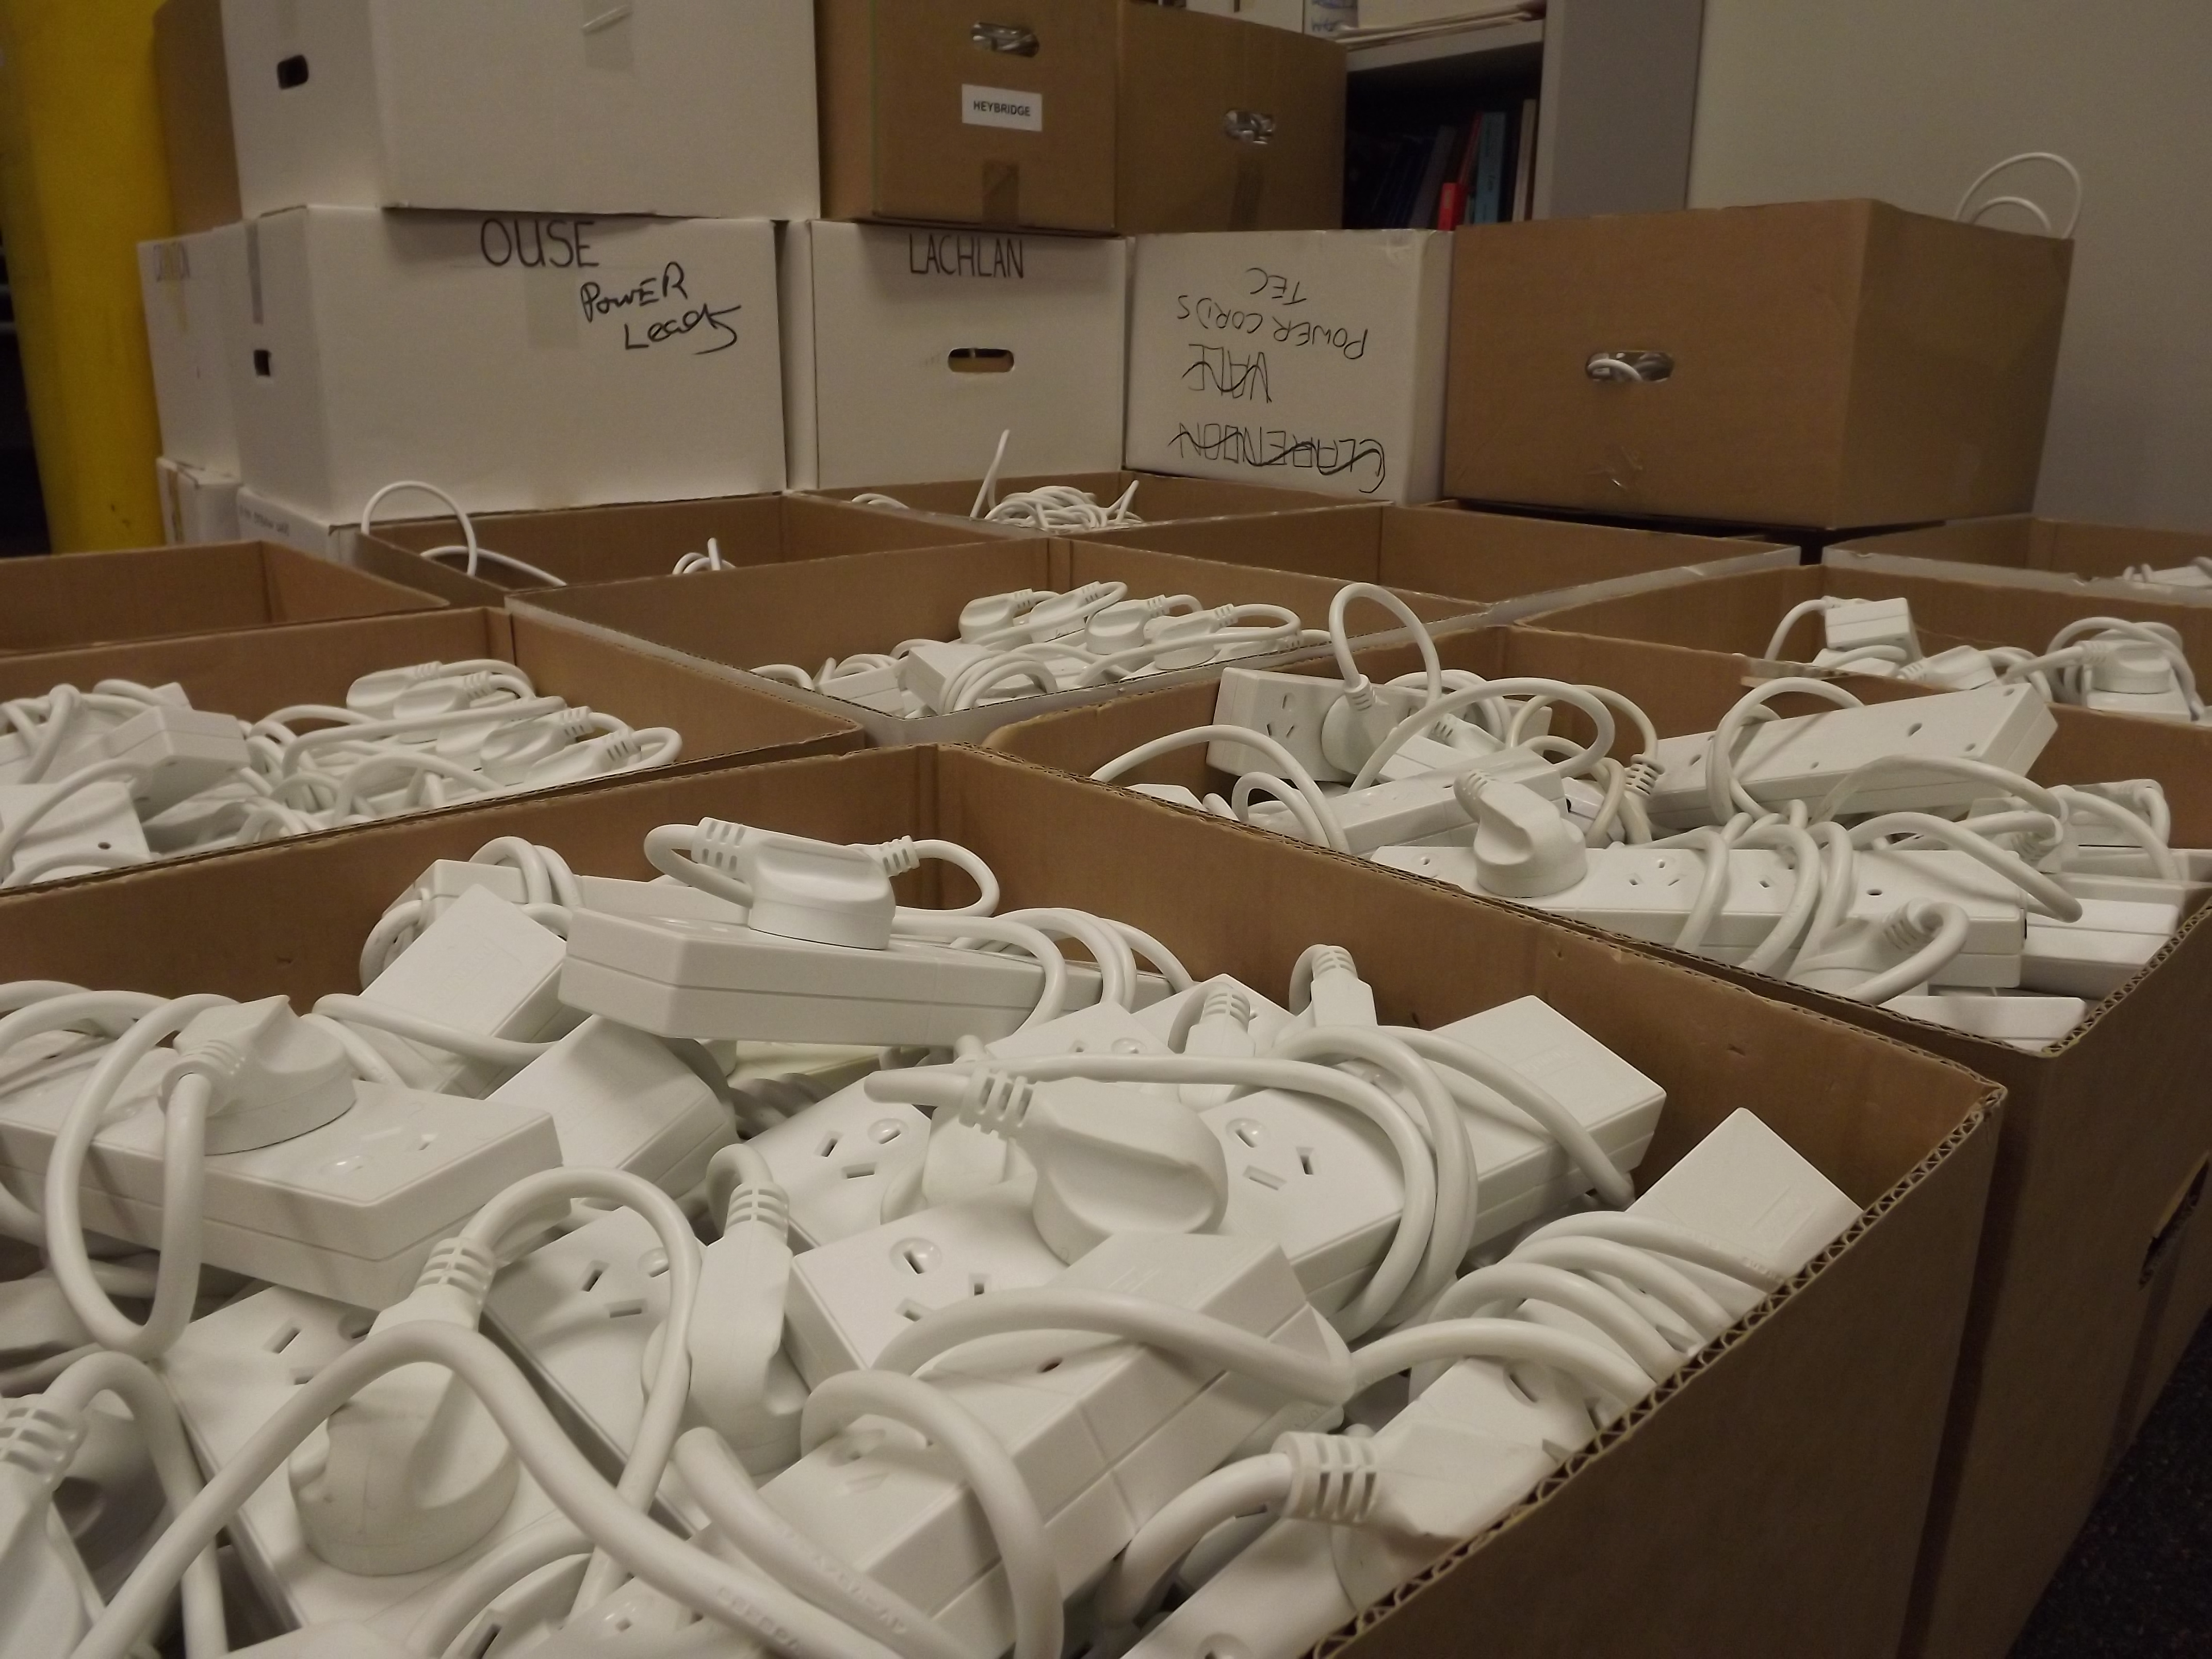 Boxes full of power boards returned from polling places